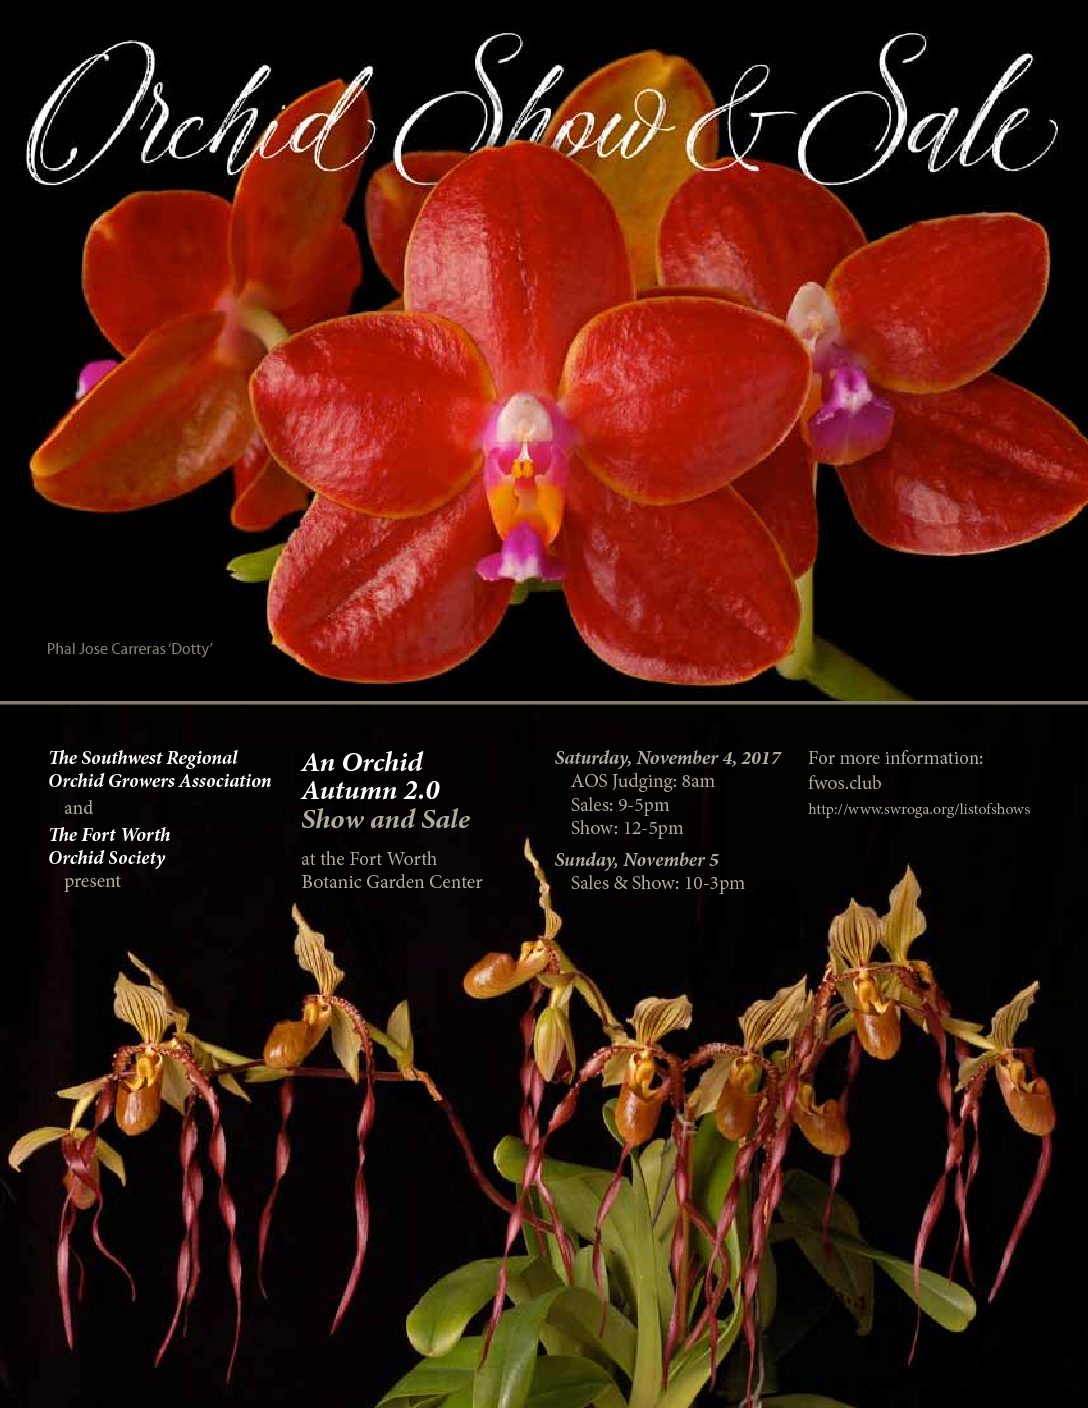 GALVESTON BAY ORCHID SOCIETY MOTHER'S DAY SHOW 2018